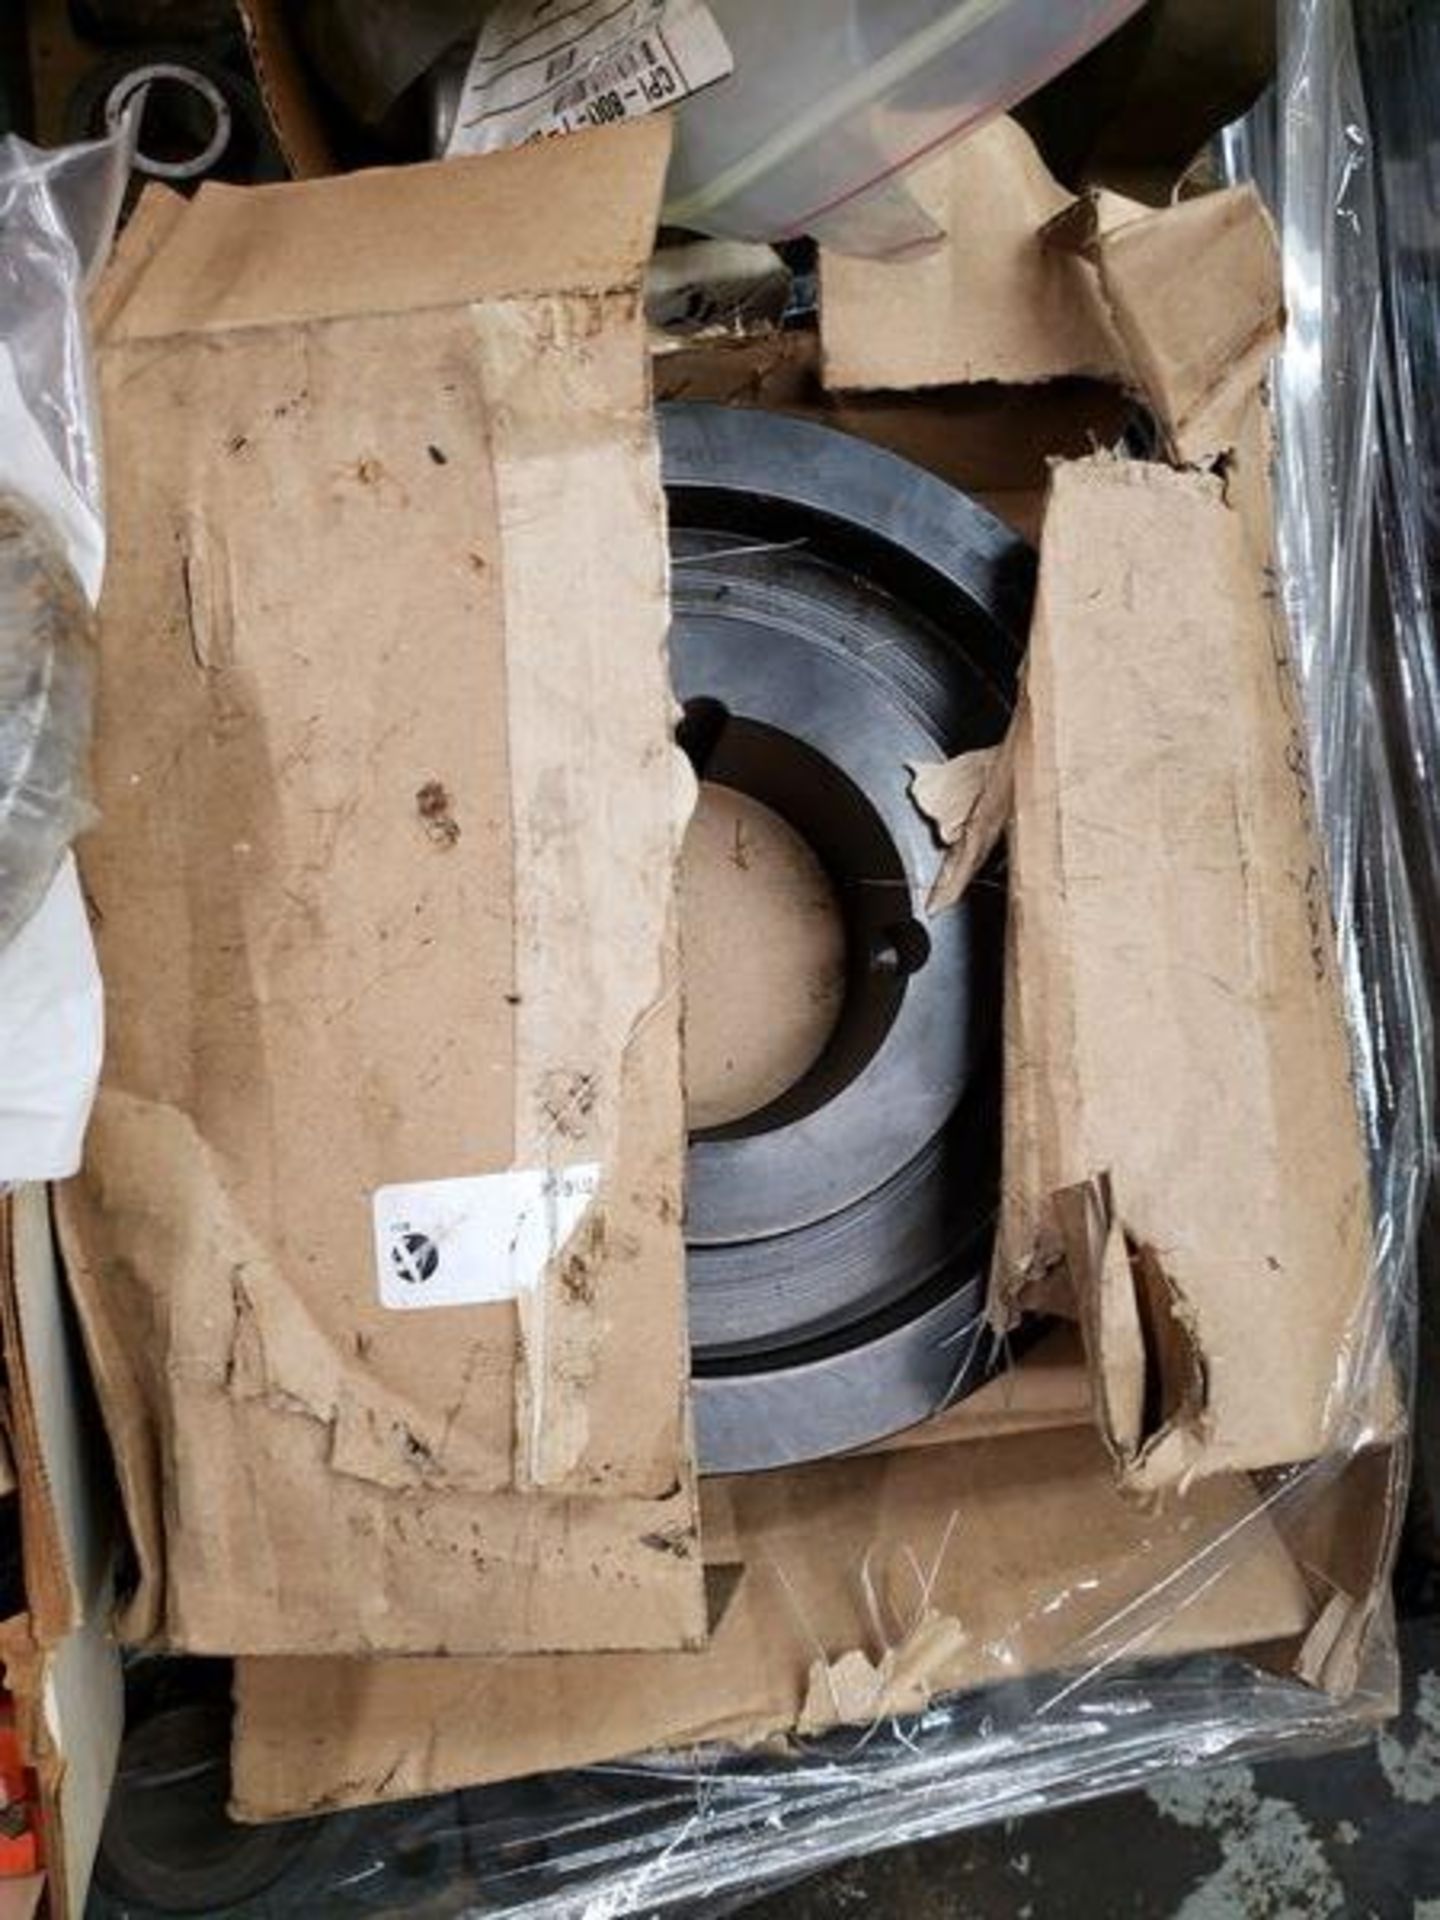 SKID OF ASSORTED BEARINGS, BELTS AND POWER TRAN MATERIAL - Image 8 of 9